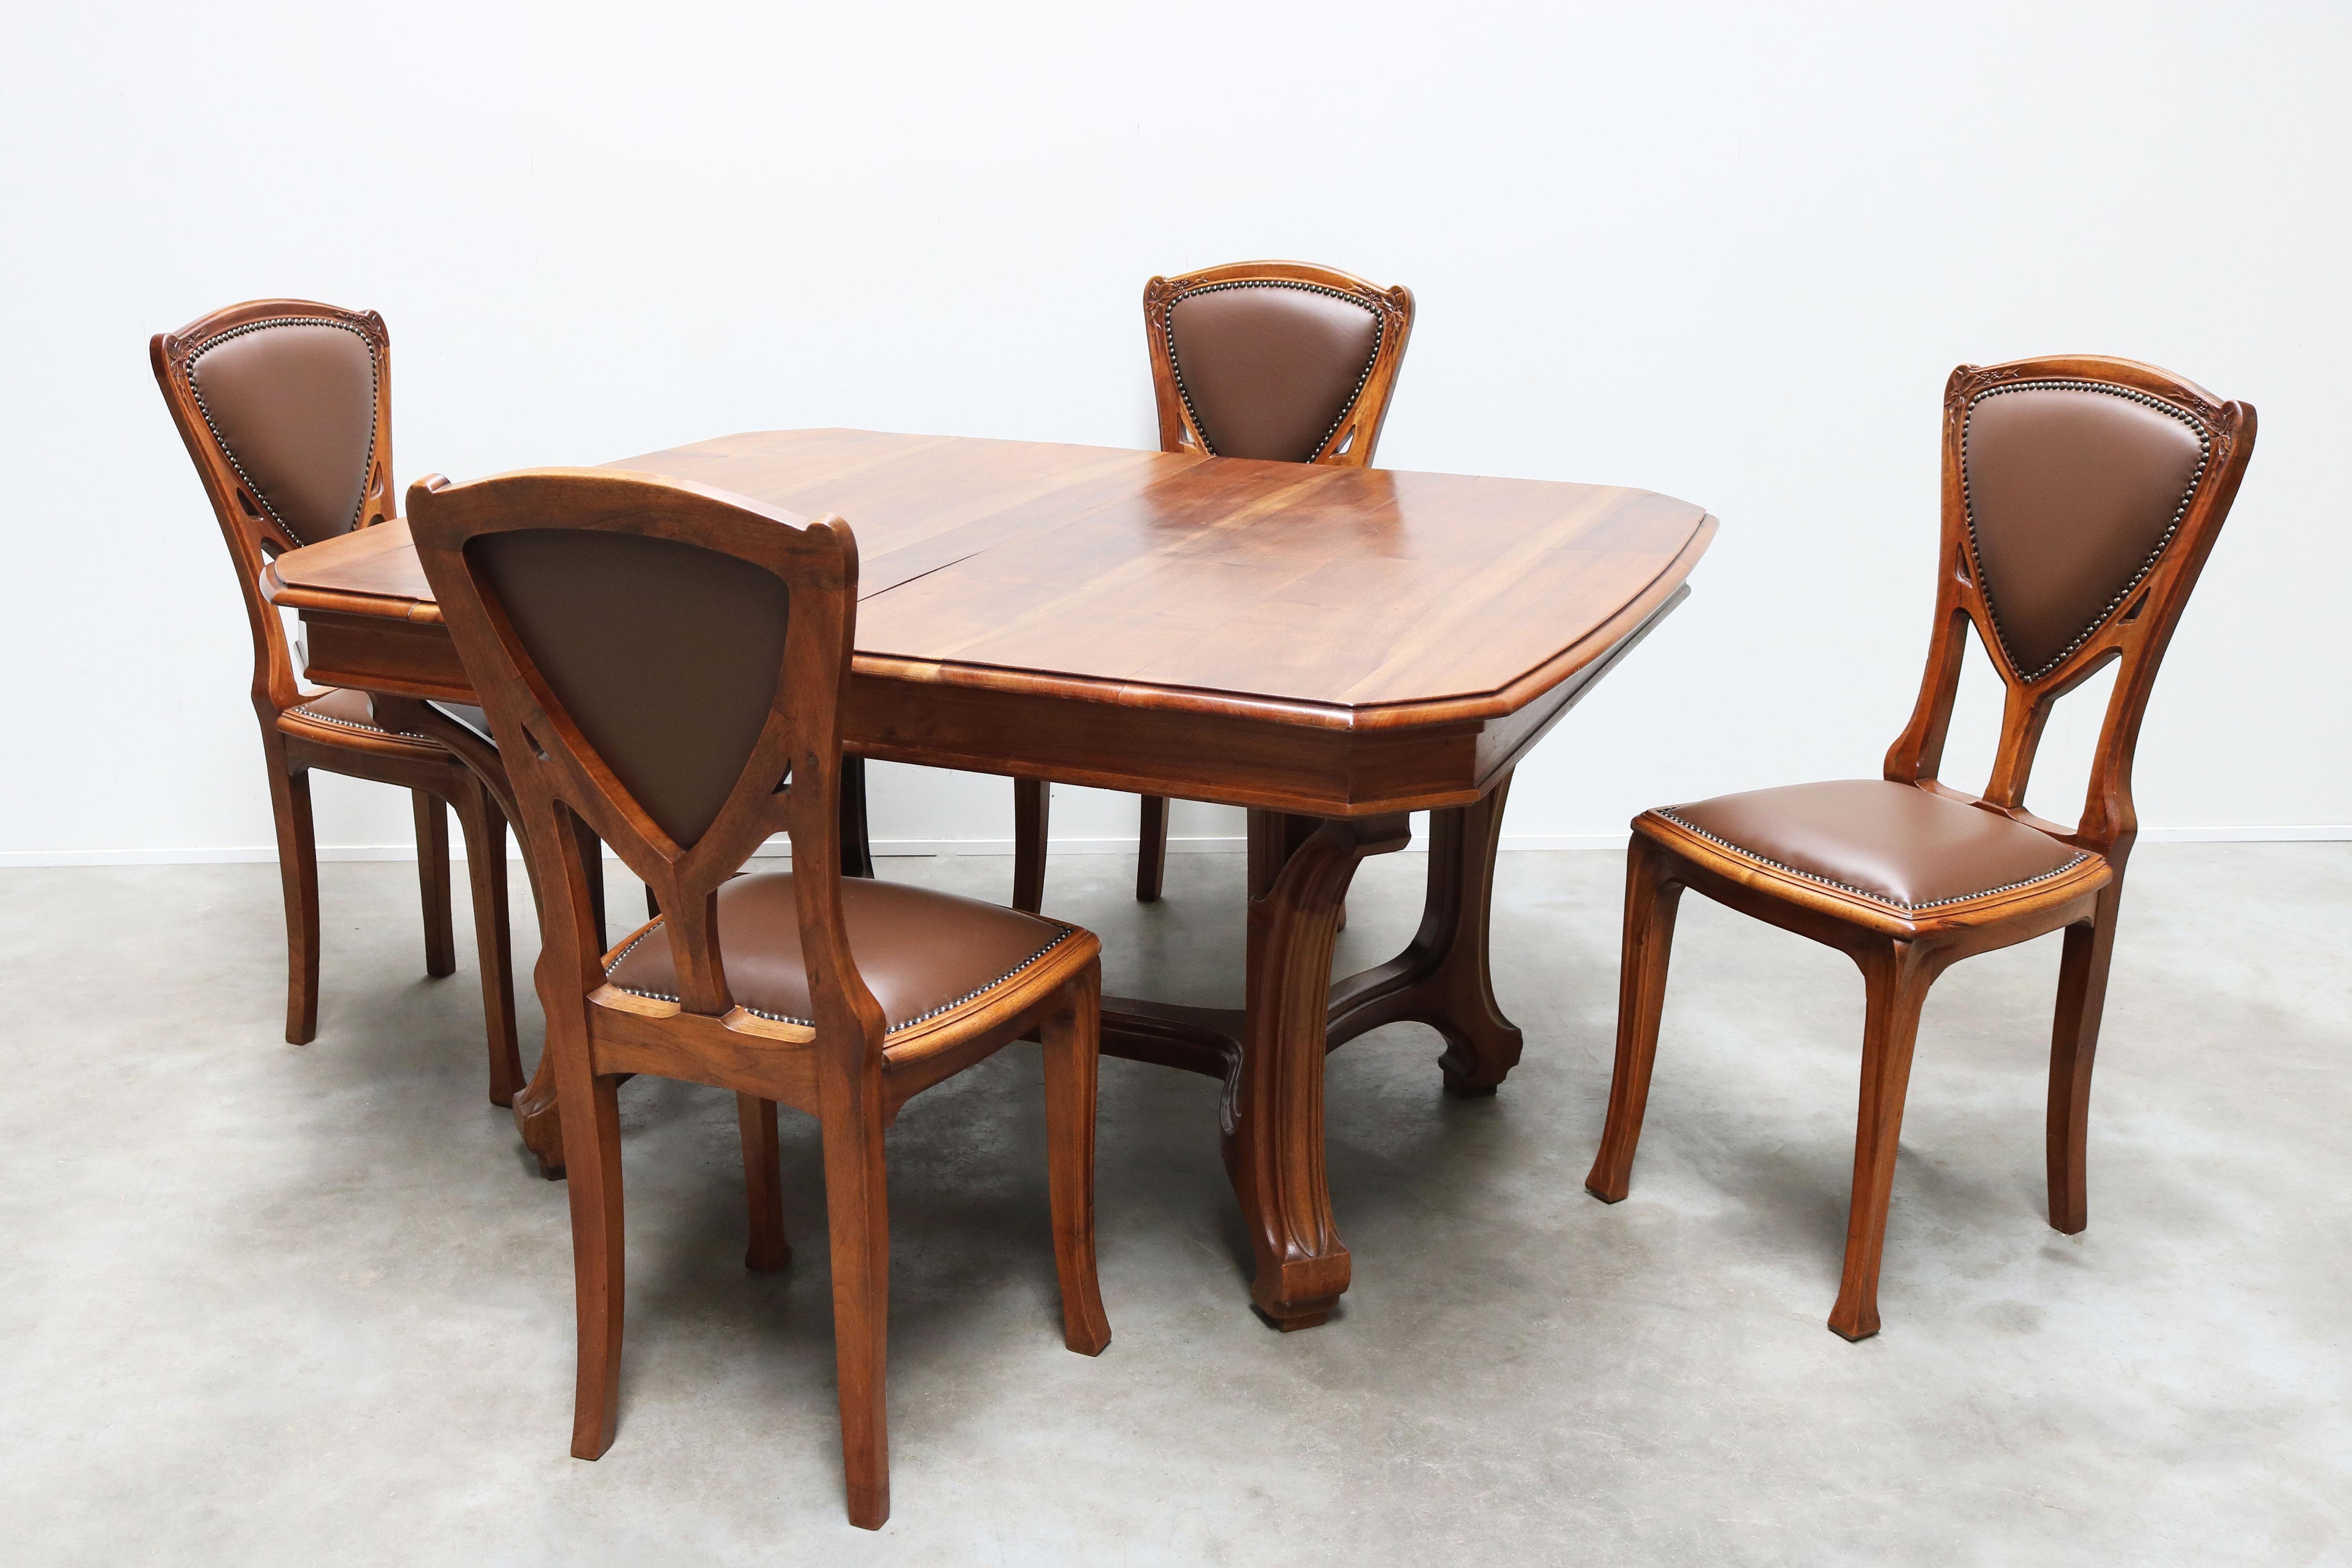 Early 20th Century Antique French Art Nouveau Dining Room Set by Eugène Vallin 1903 Table Chairs For Sale